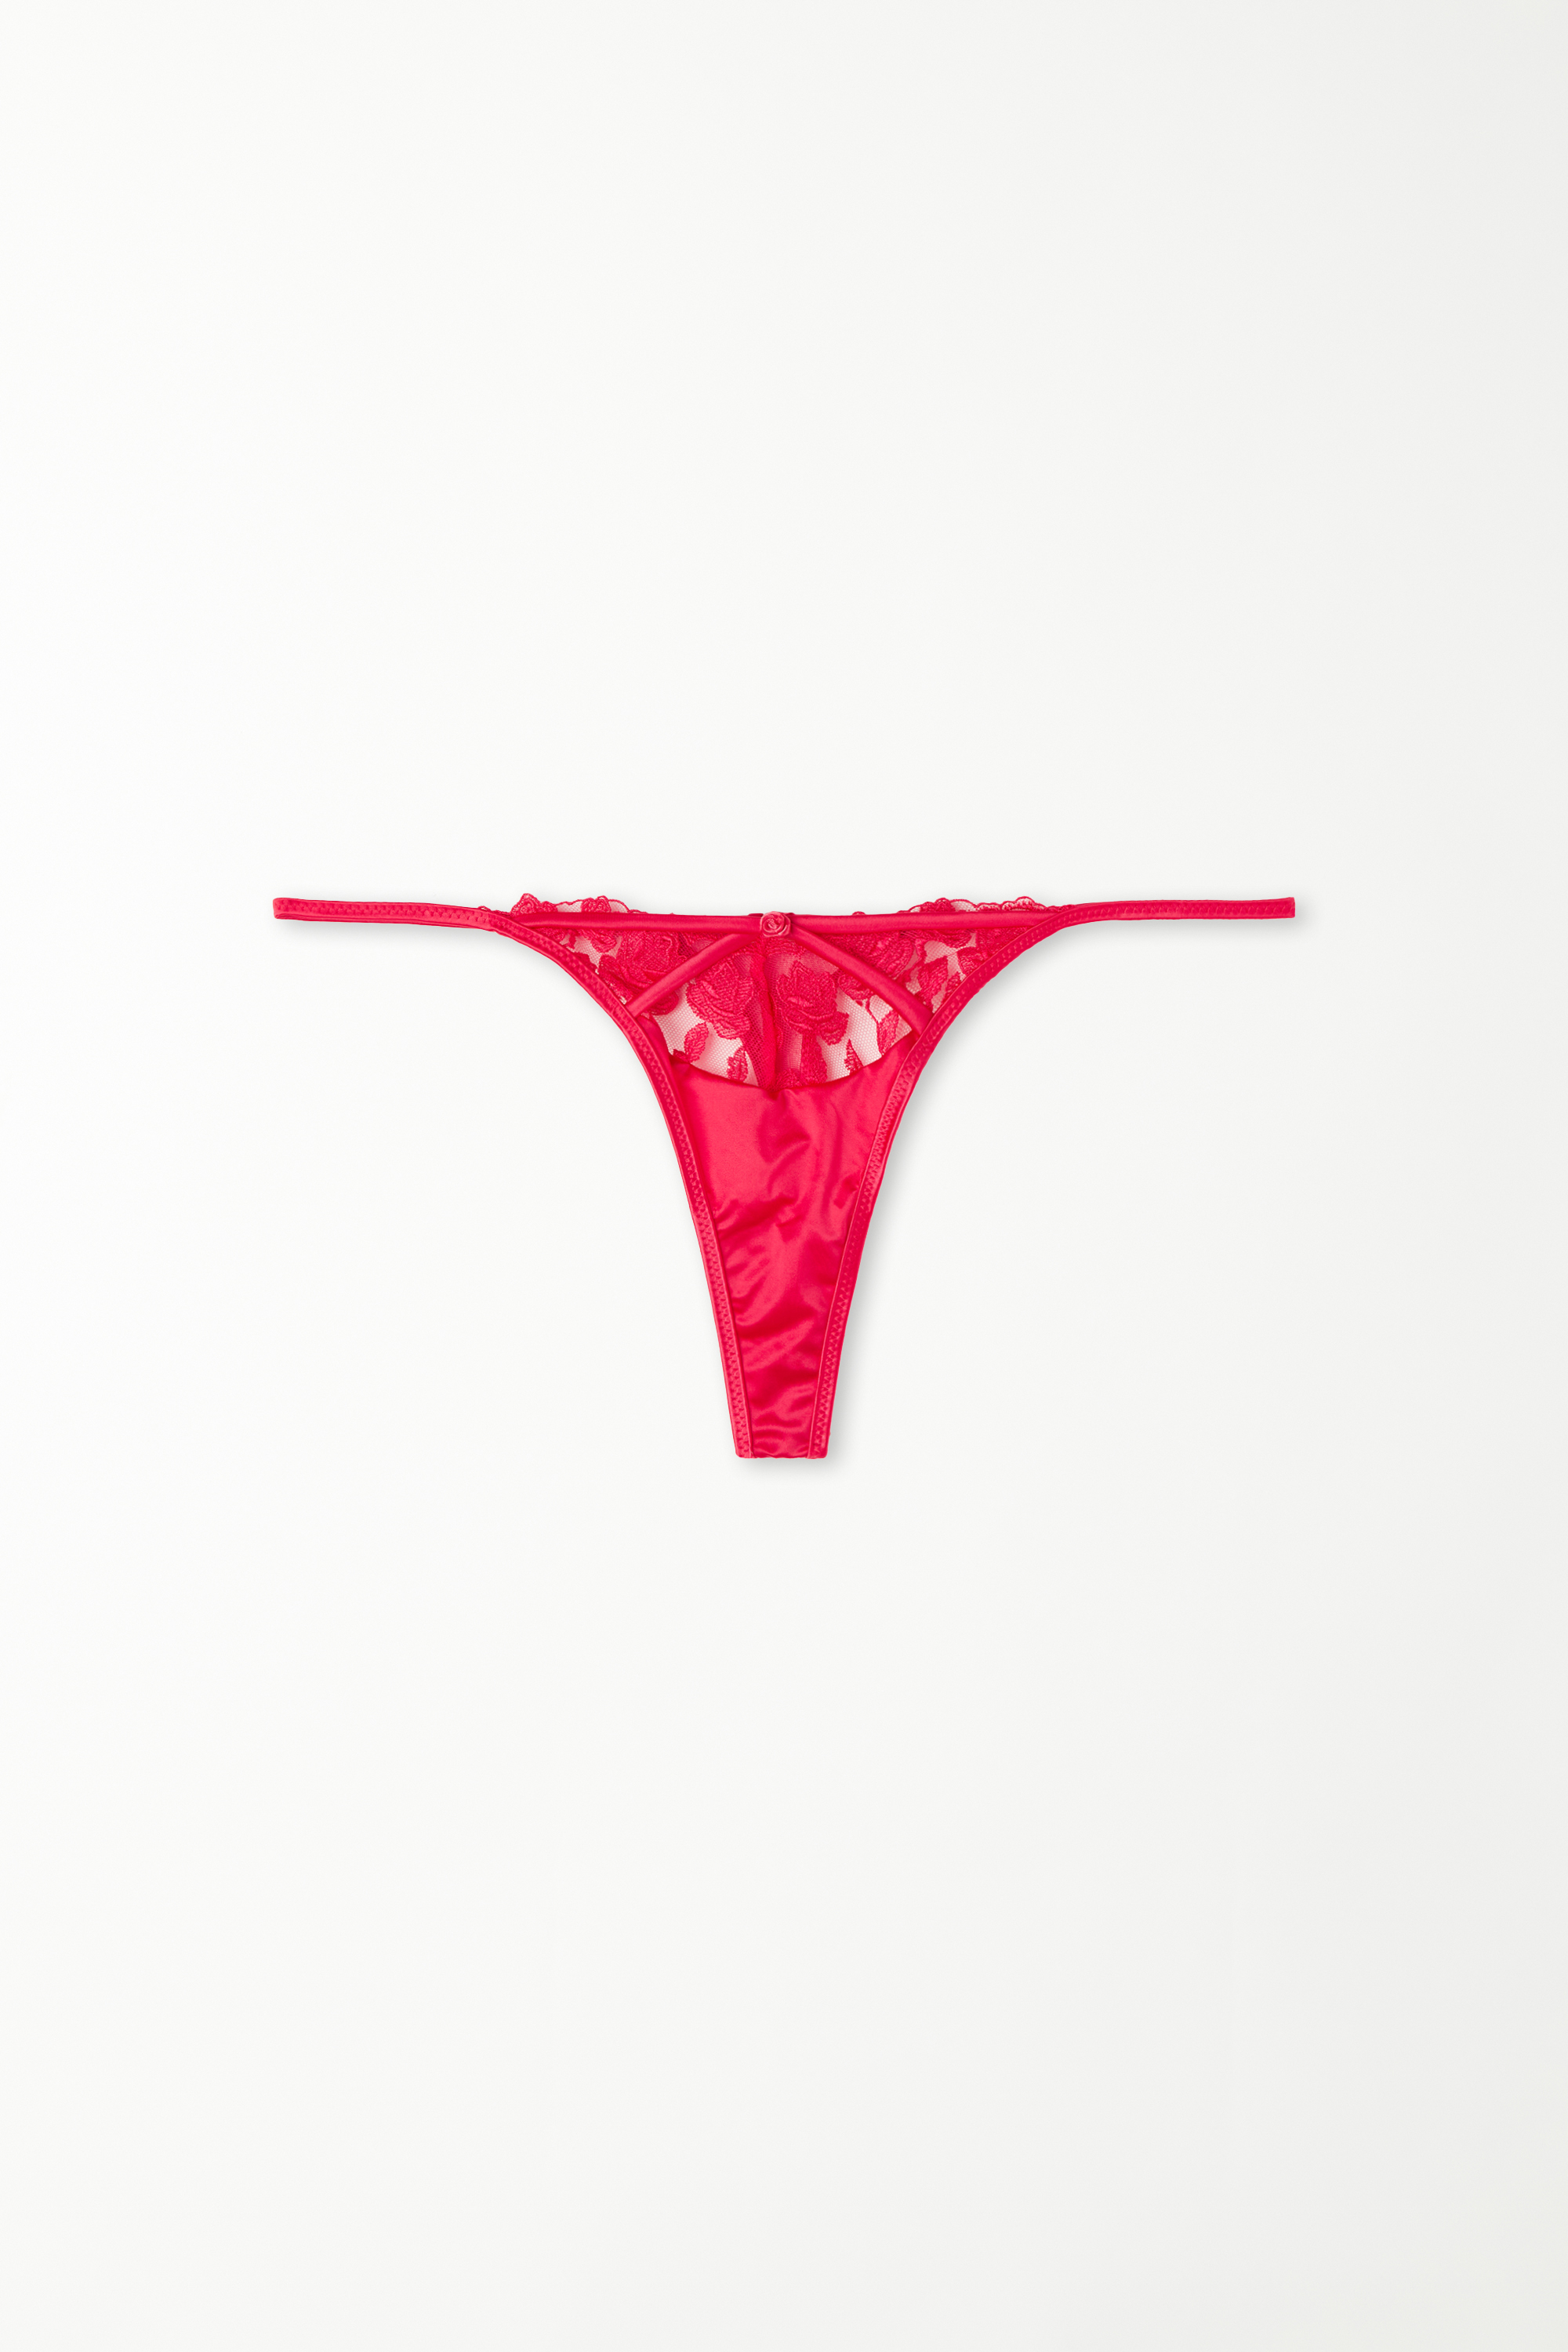 Red Passion Lace High-Cut Tanga Panel G-String